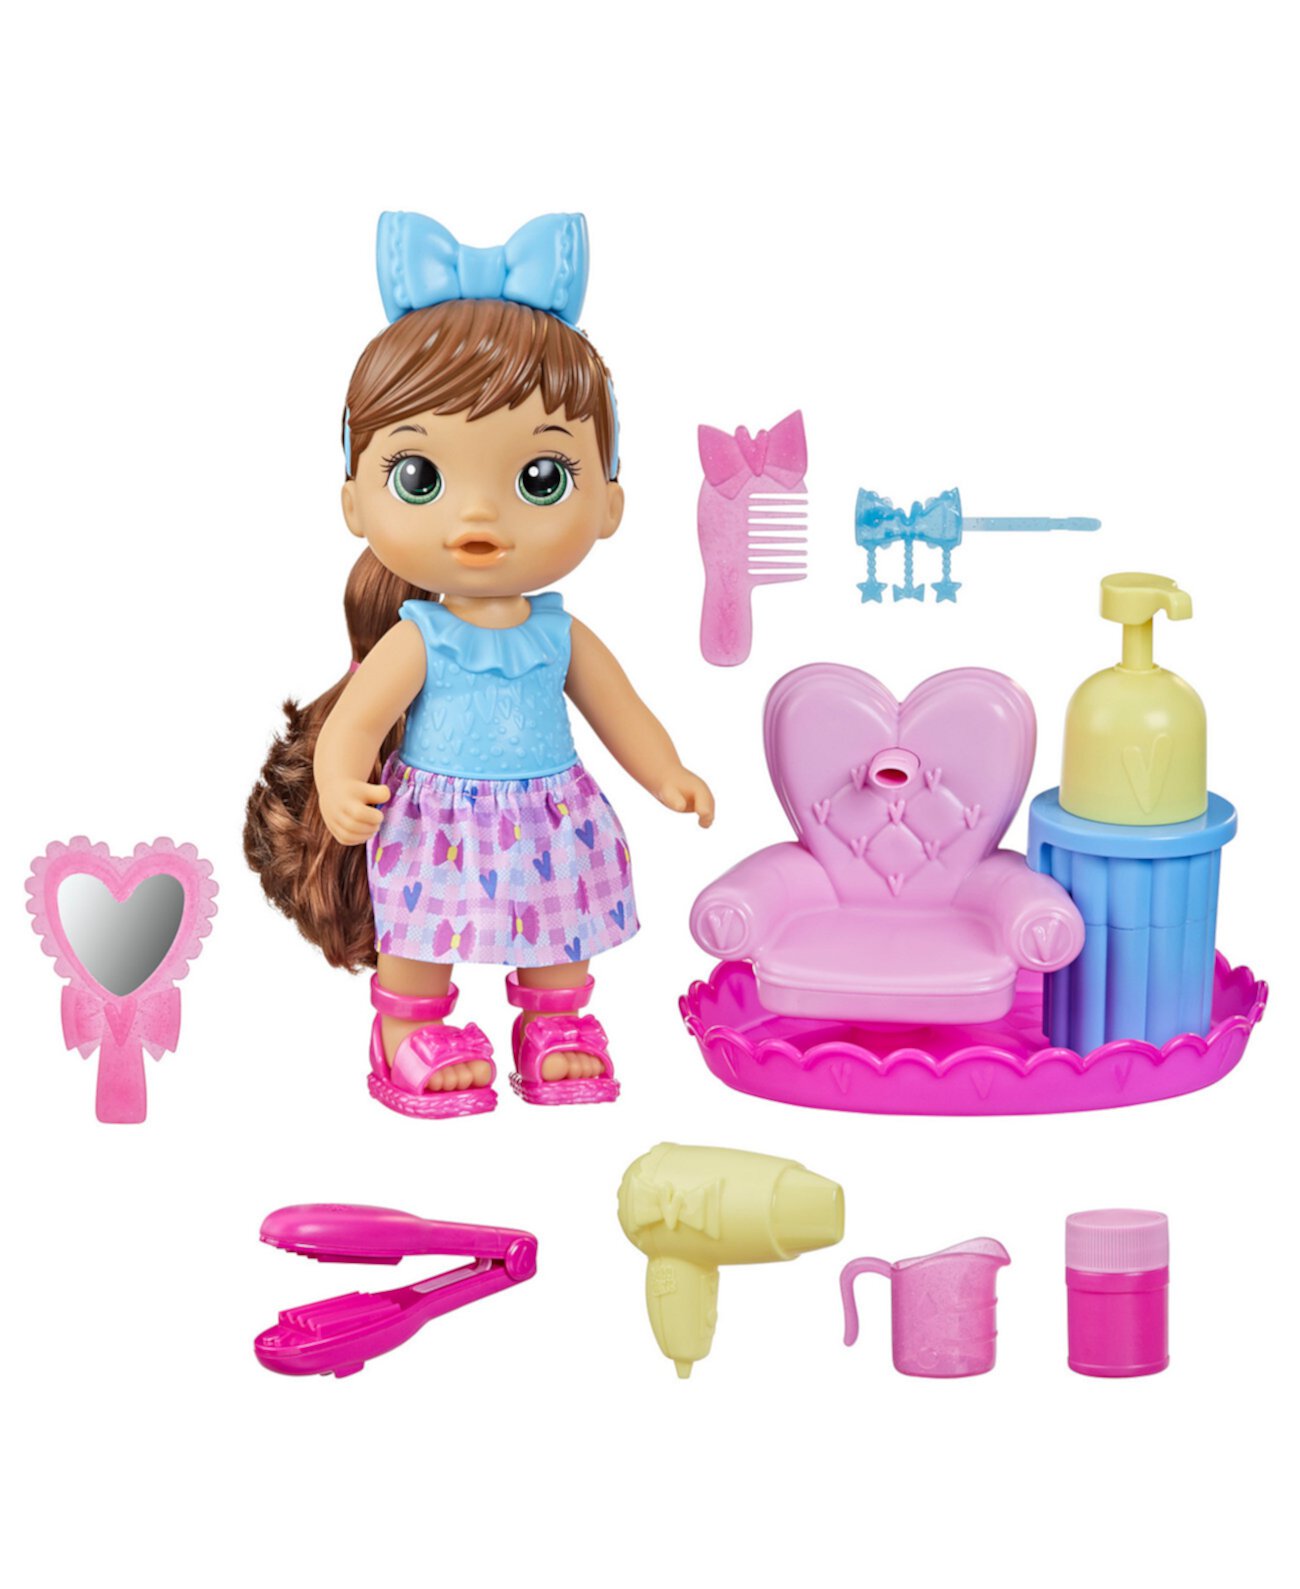 Набор кукол Sudsy Styling Baby Alive